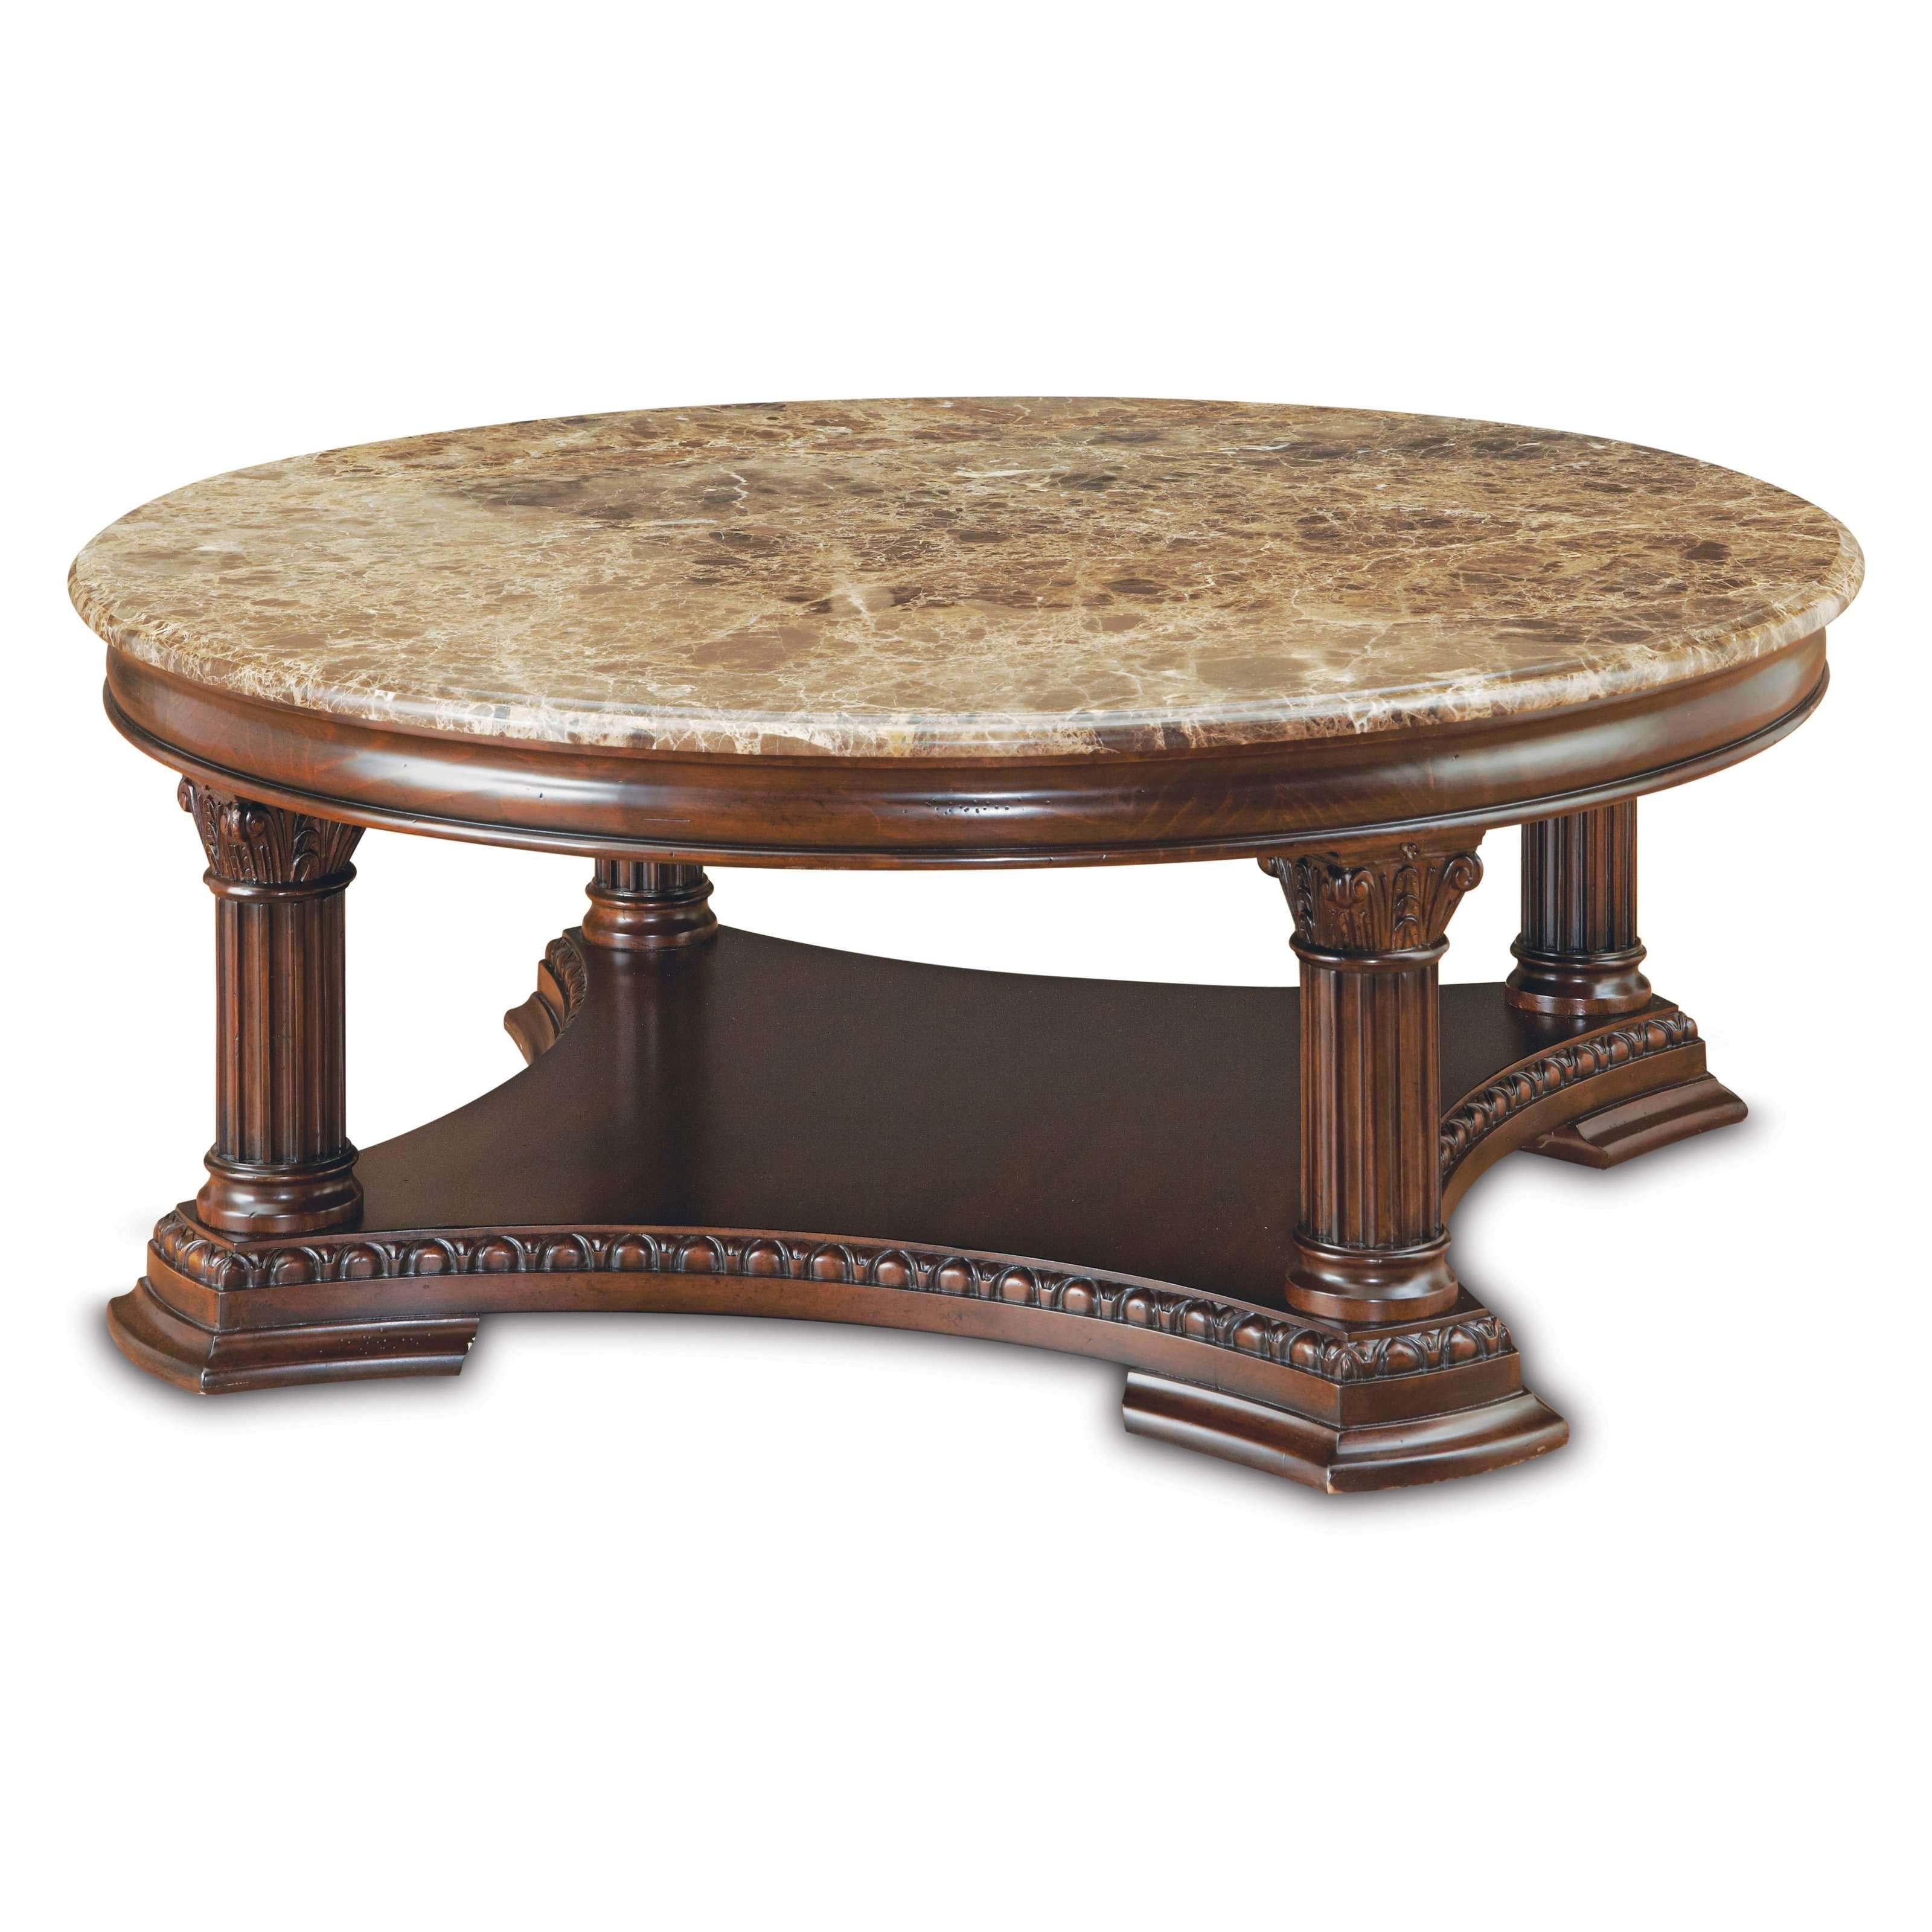 Coffee Tables : Hammered Metal Coffee Table Large Round Glass Low Throughout Famous Large Round Low Coffee Tables (View 11 of 20)